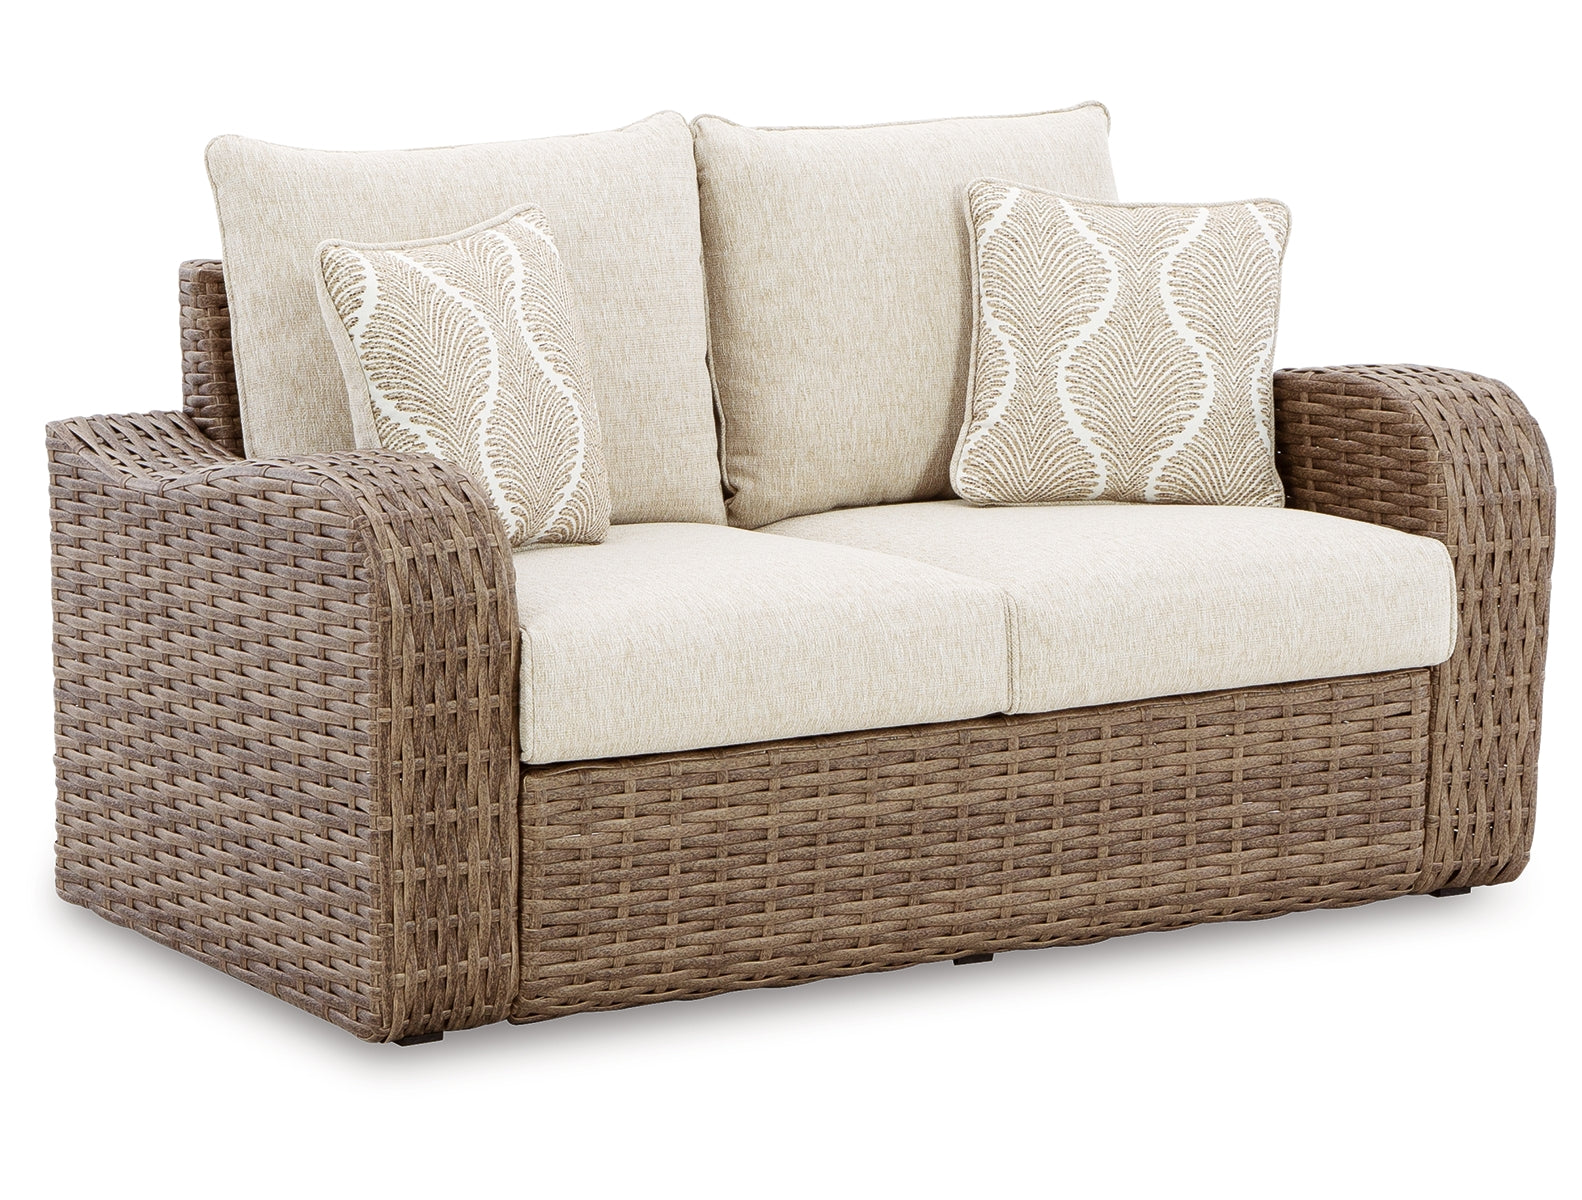 Malayah Outdoor Loveseat and 2 Lounge Chairs with Fire Pit Table